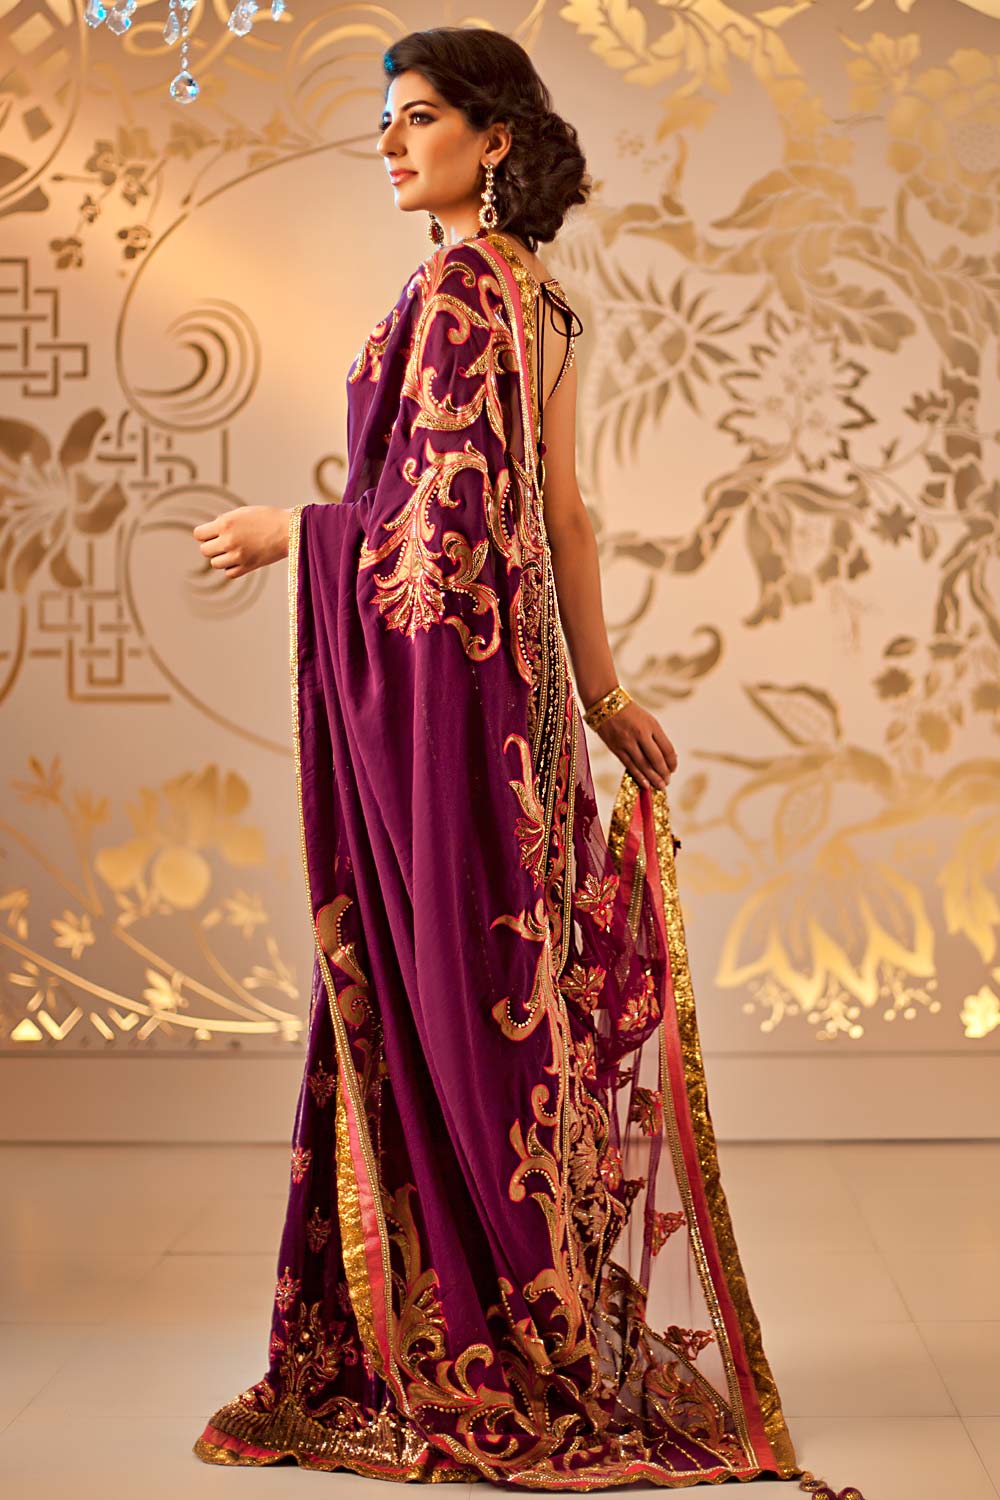 Bridal Sarees | Indian Bridal Sarees | Bridal Sarees for Parties ...